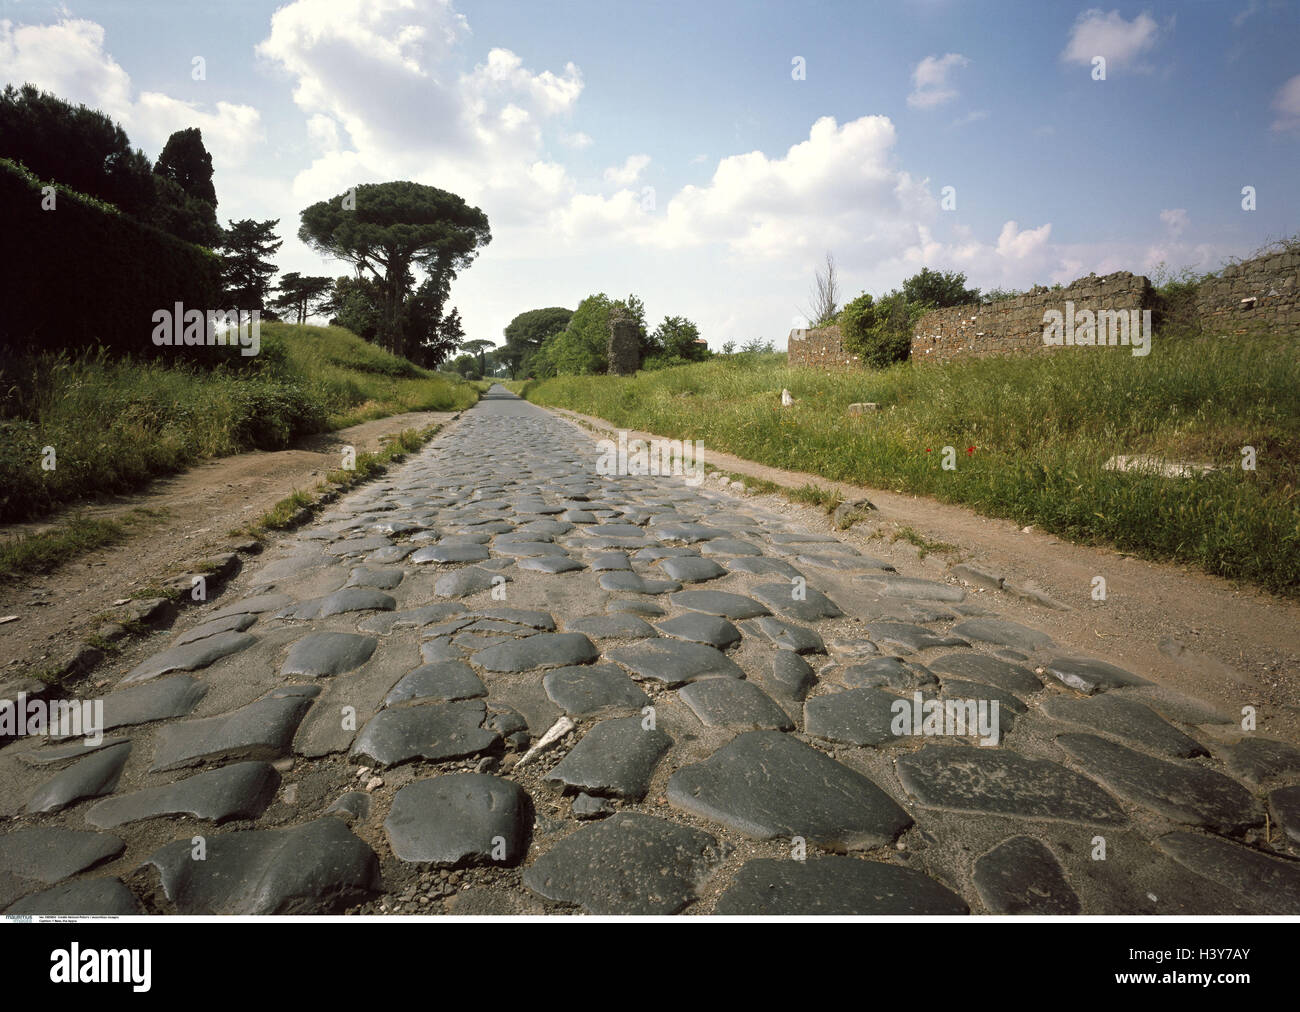 Italy, Rome, via Appia, paving-stones, Europe, Southern, Europe, region Latium, culture, Gräberstrasse, queen the streets, the most important highway the Roman antiquity, holy street, via Sacra, paved, cloudy sky Stock Photo